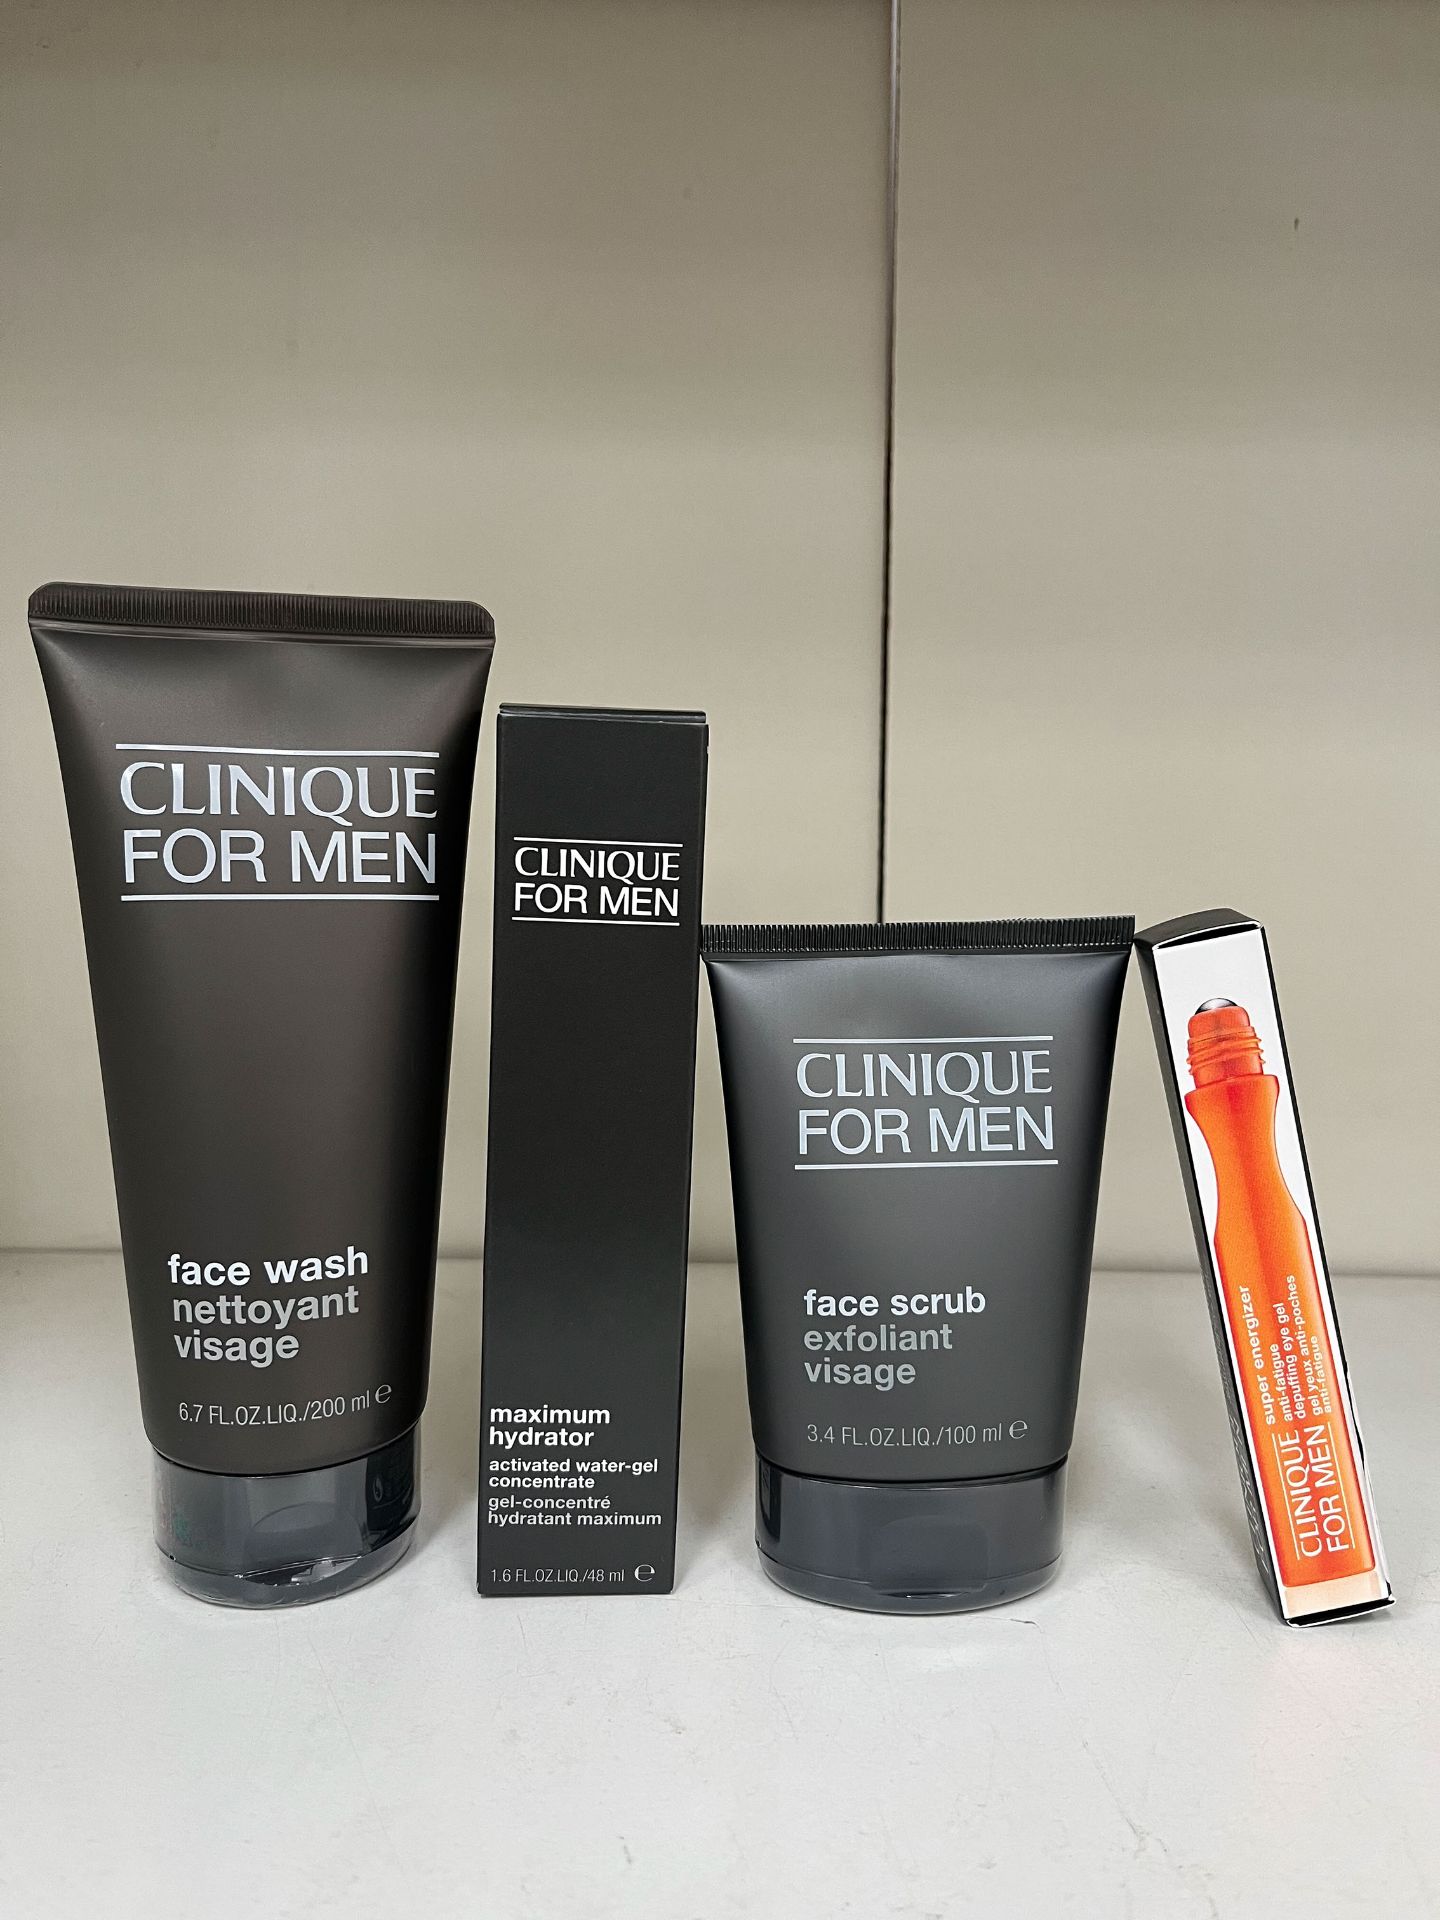 A Selection of Clinique Men's Facial Products